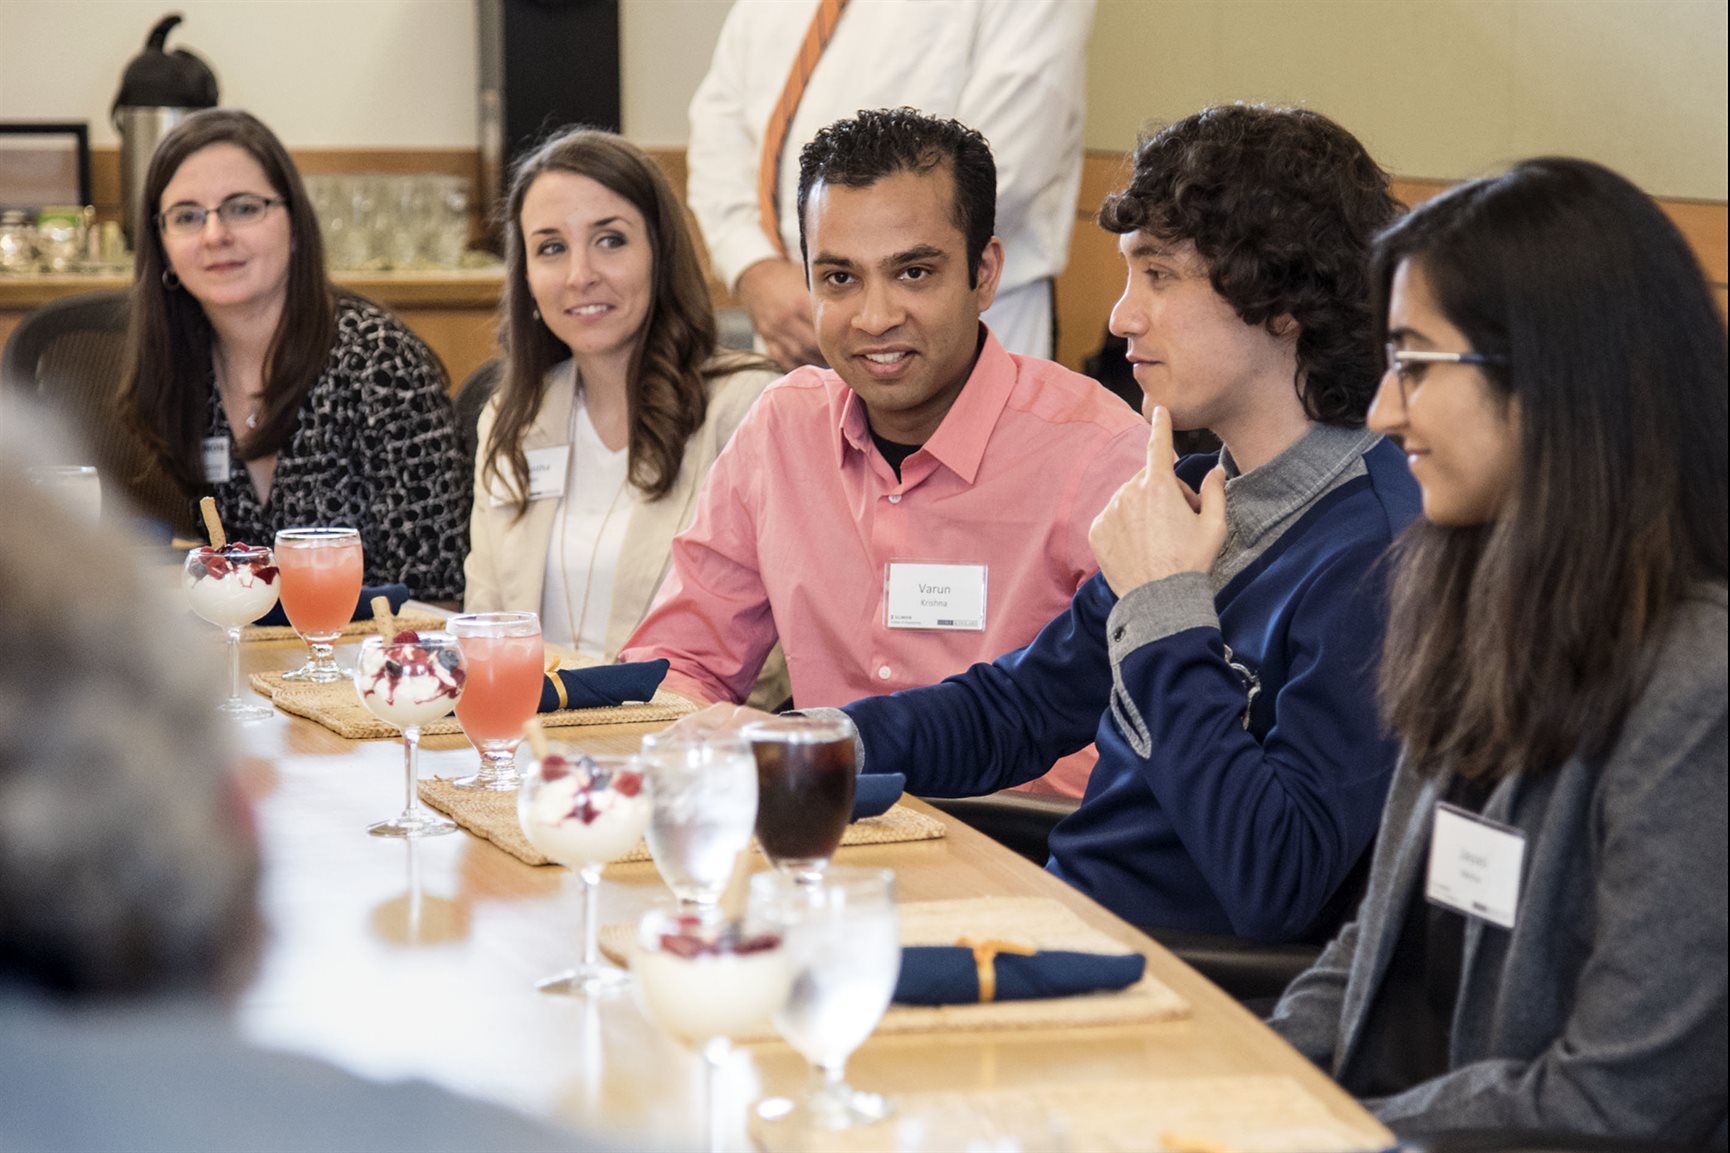 Siebel scholars having lunch at an event.